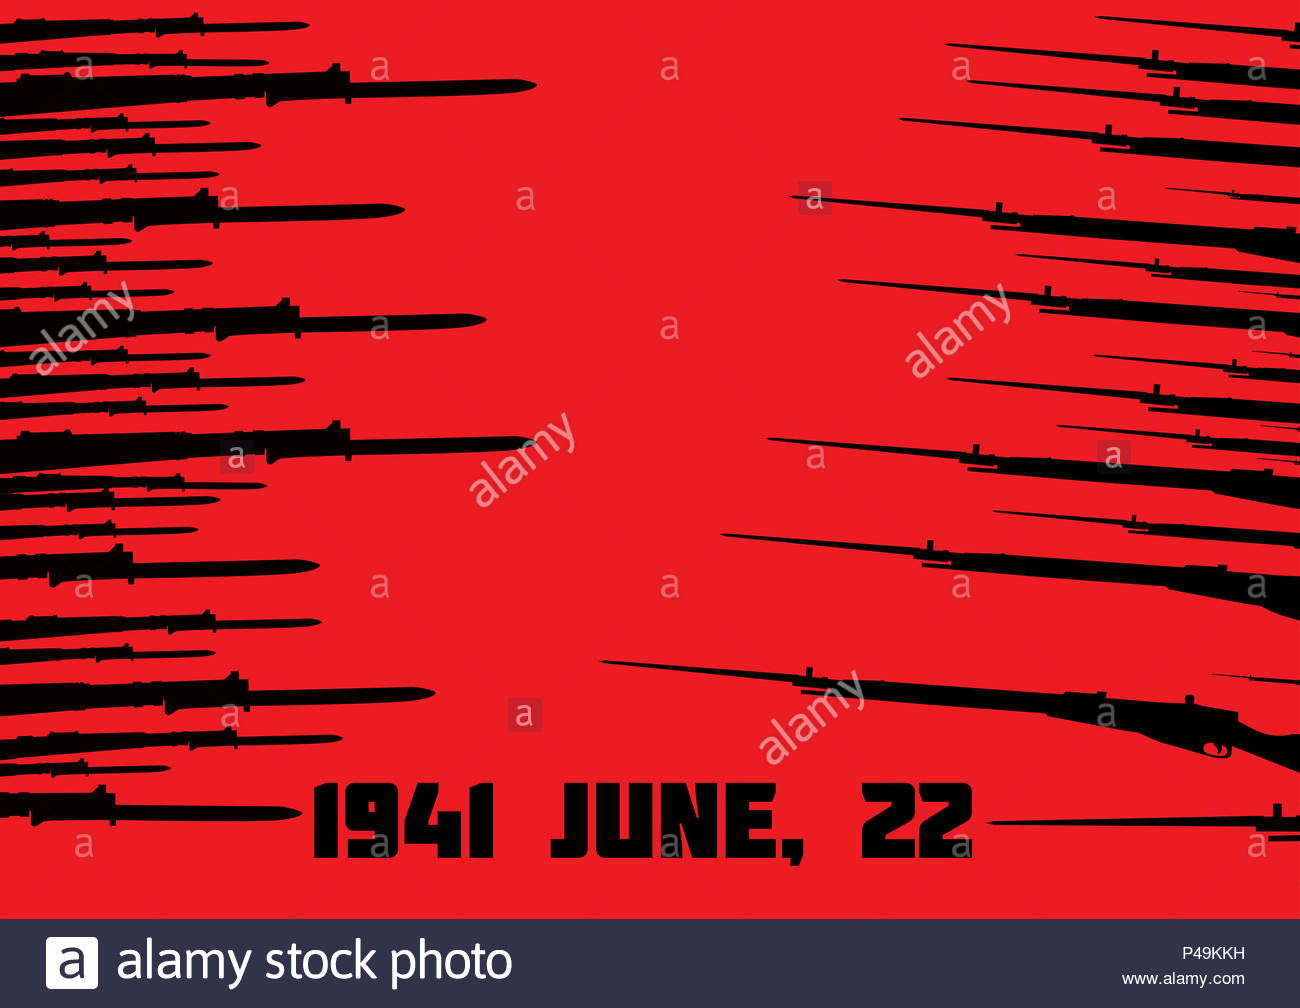 Soviet And German Rifles On The Red Background Design To June